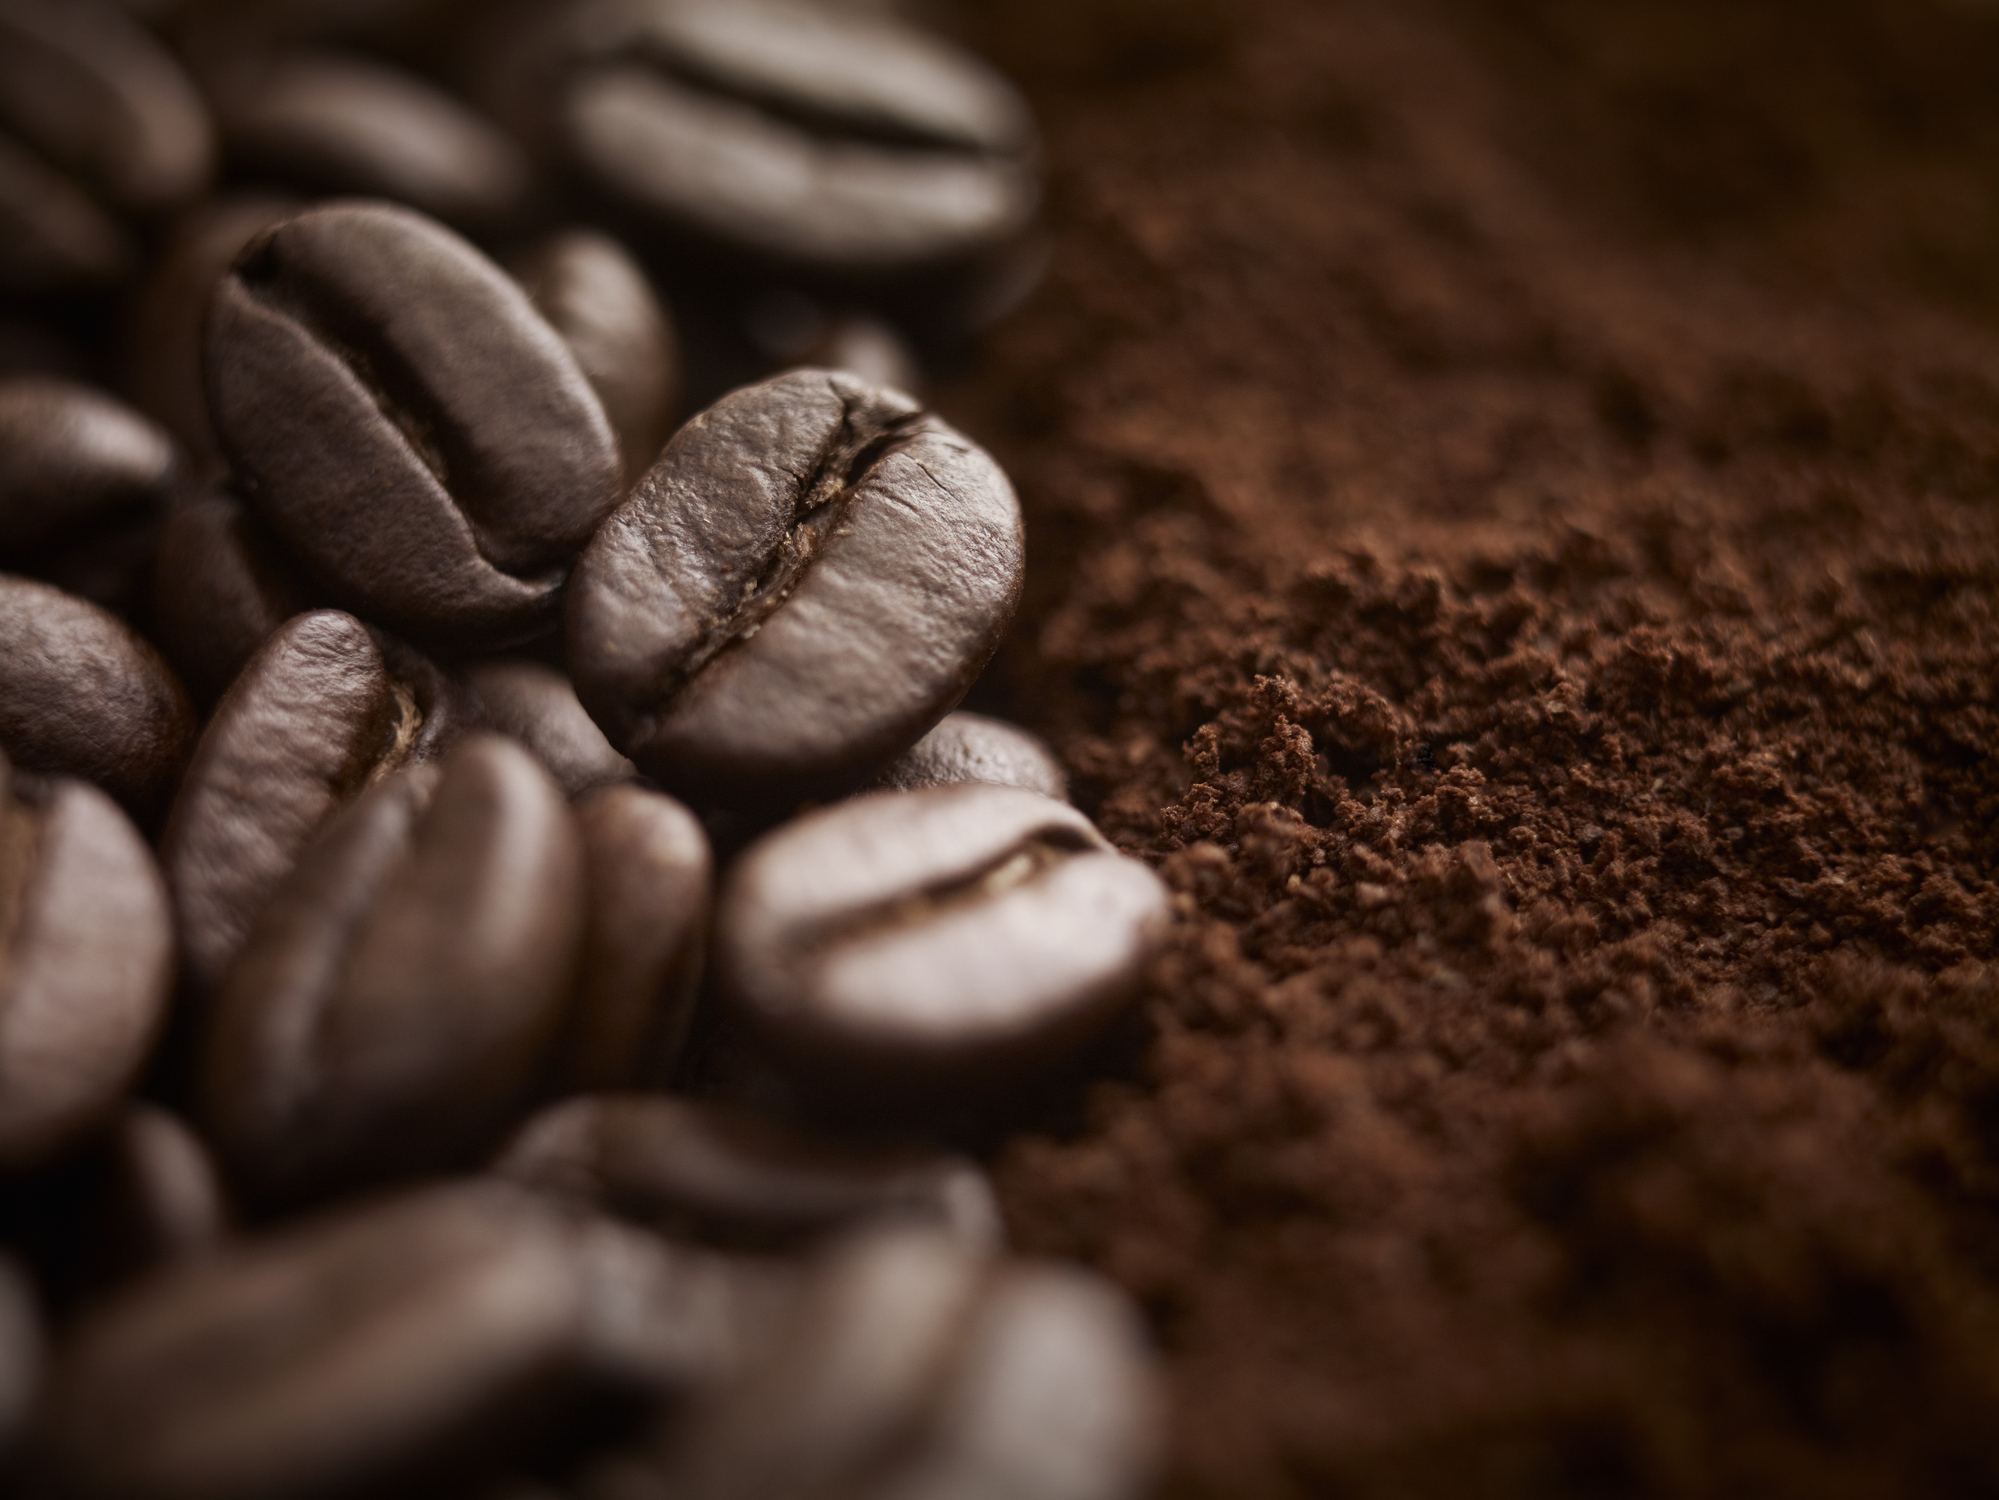 Creating sustainable bio-products from spent coffee grounds